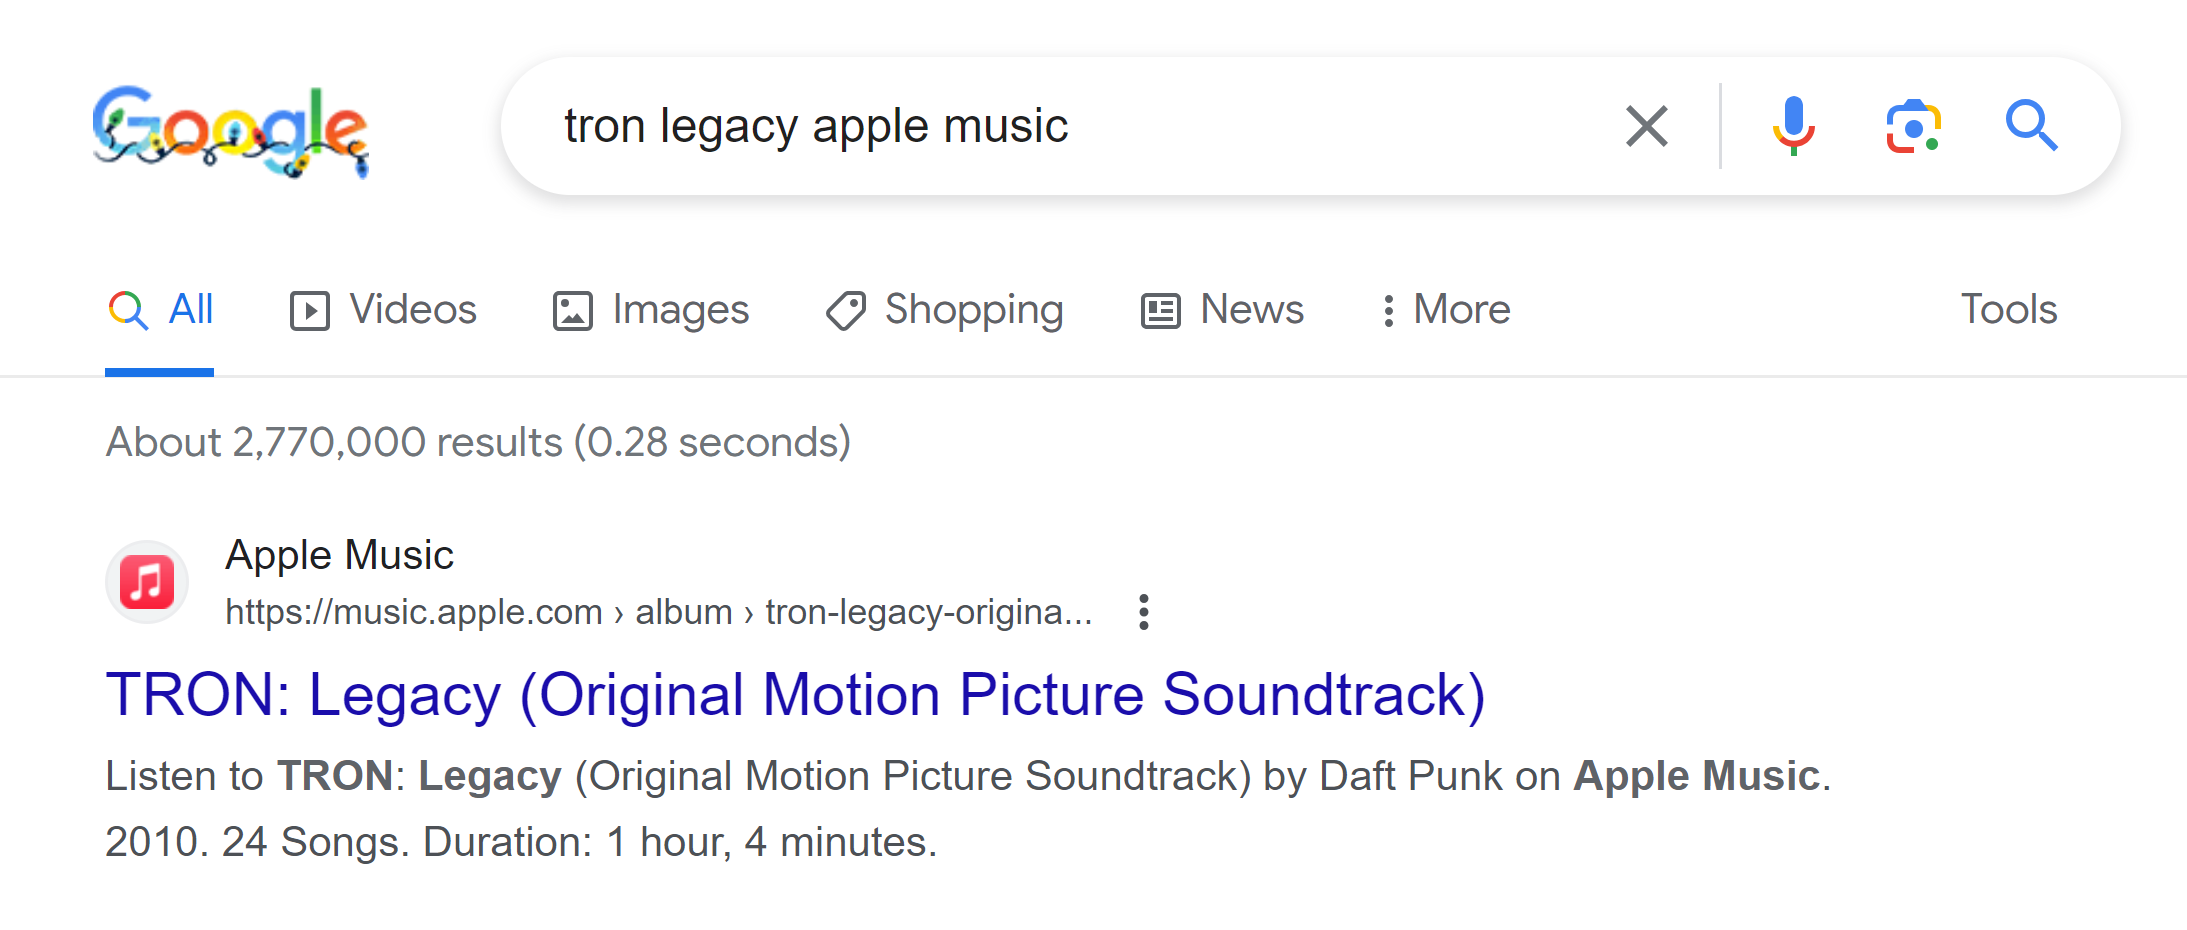 
Search for Apple Music on Google for free, high-quality album art